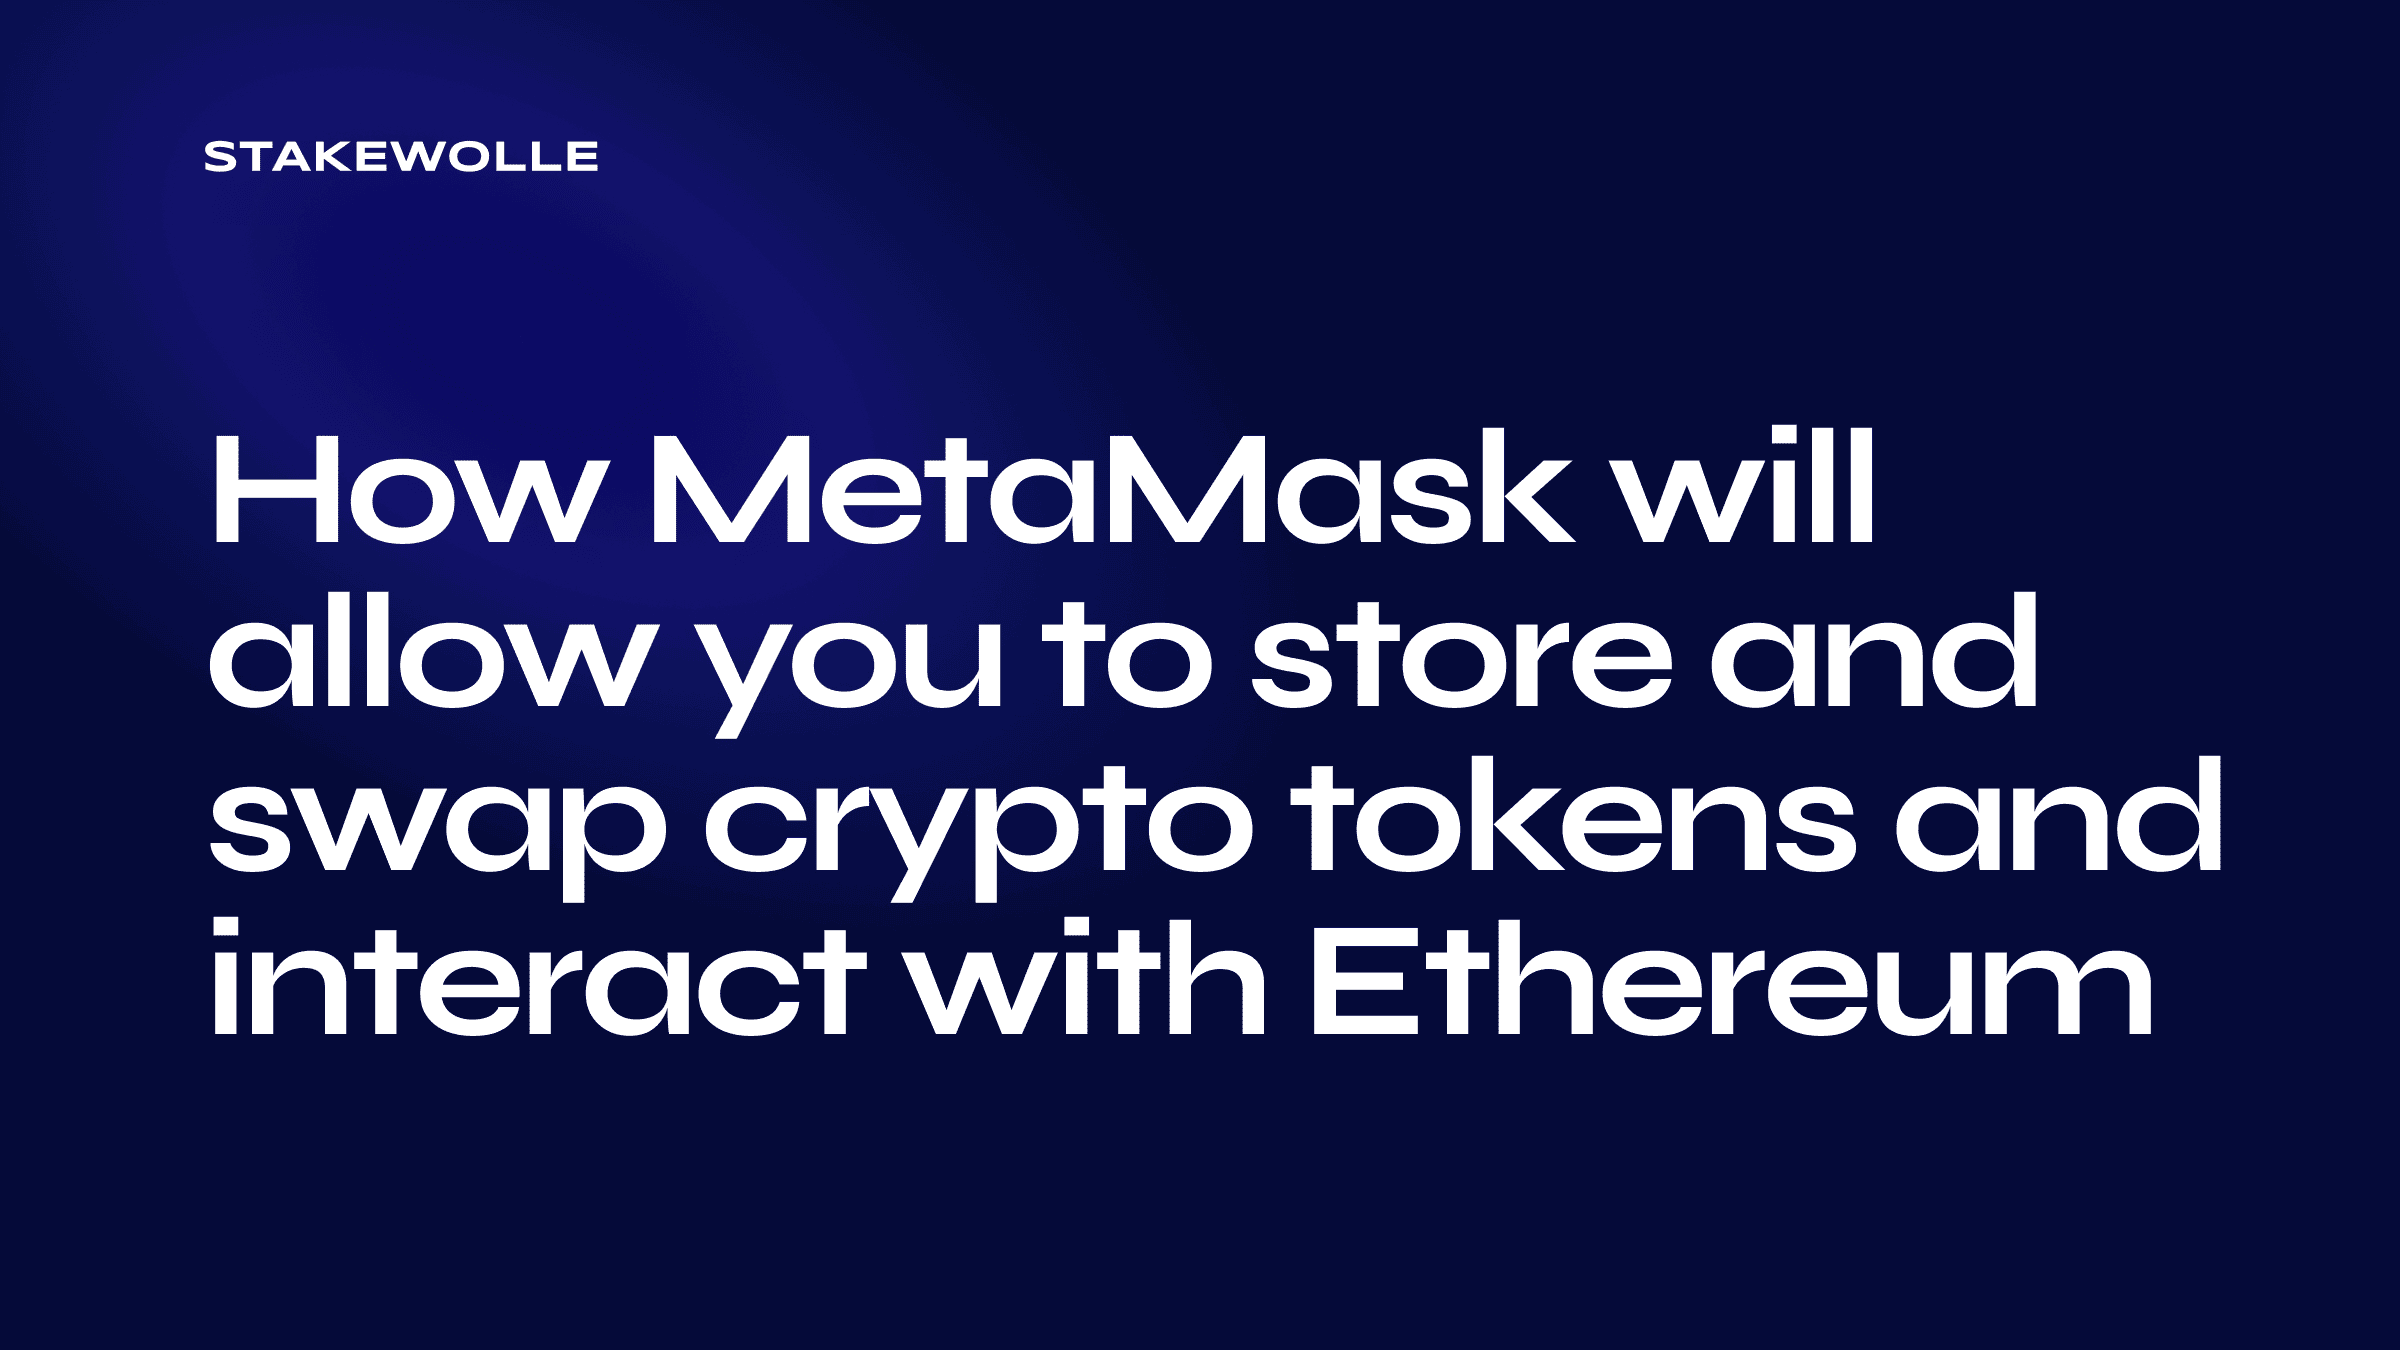 How MetaMask will allow you to store and swap crypto tokens and interact with Ethereum